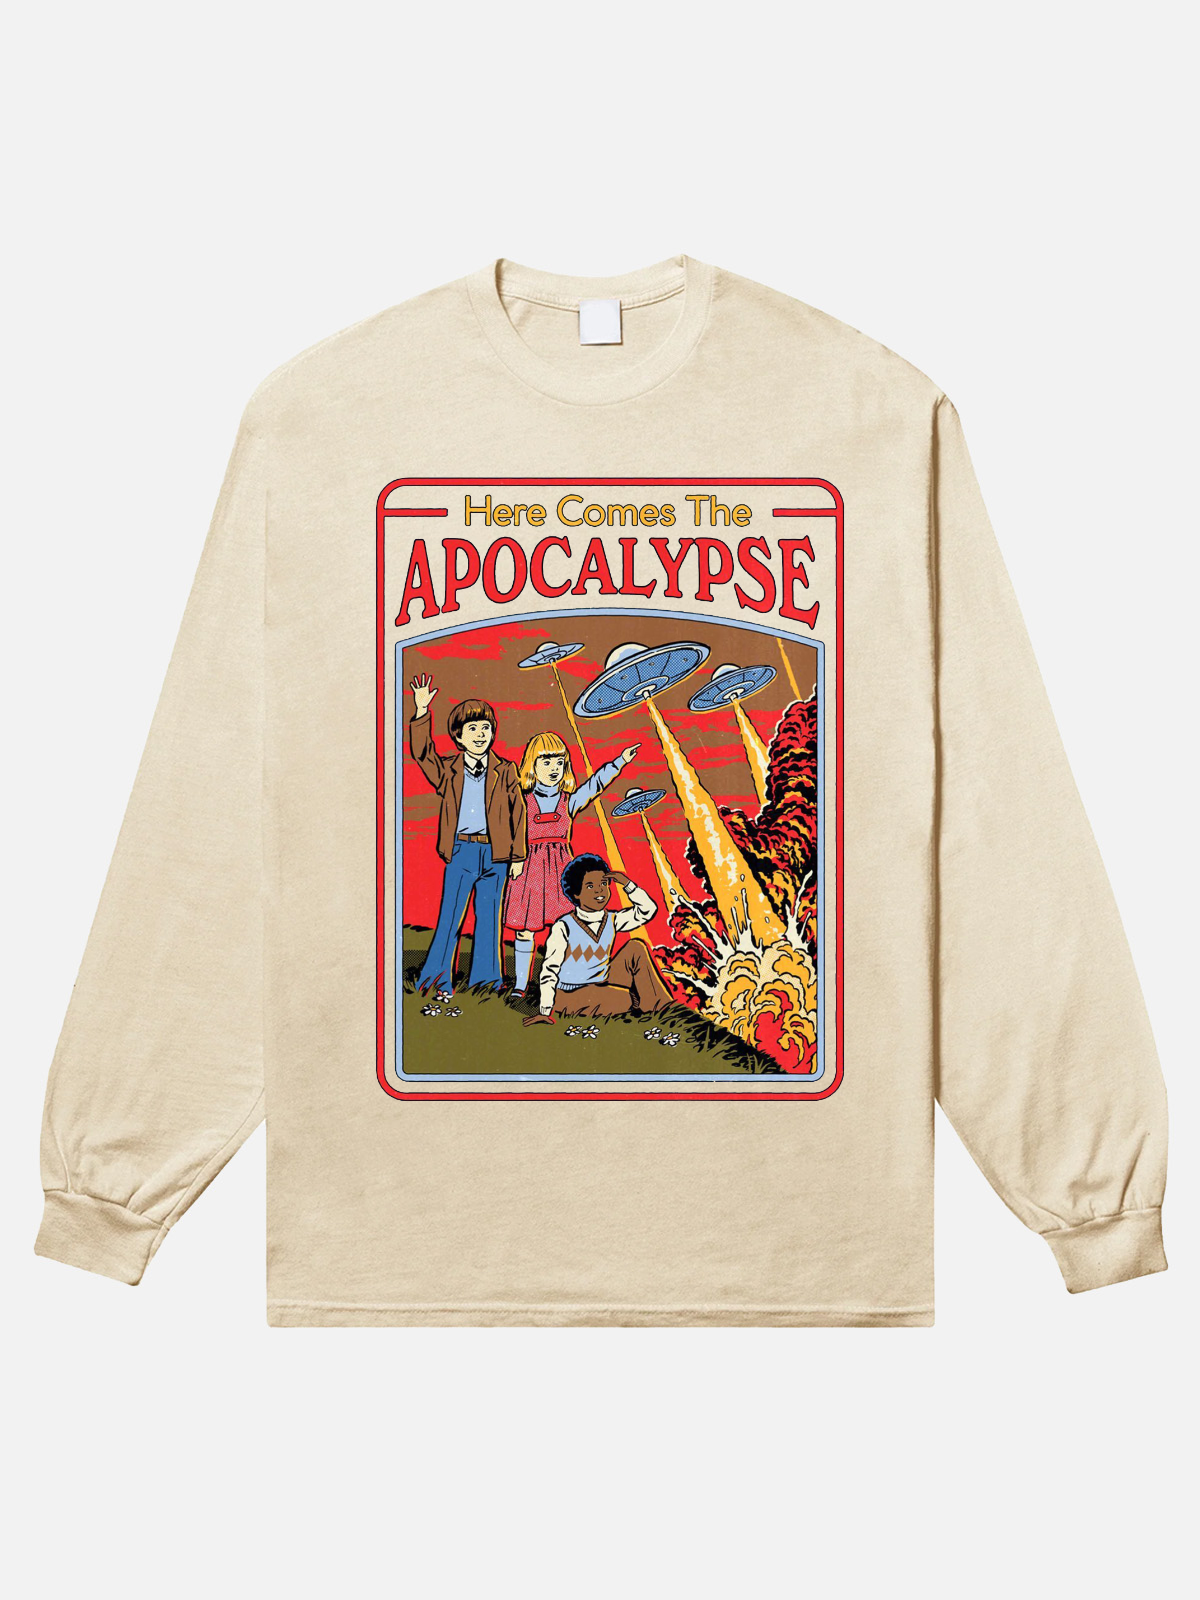 Here Come The Apocalypse Long Sleeve T-Shirt